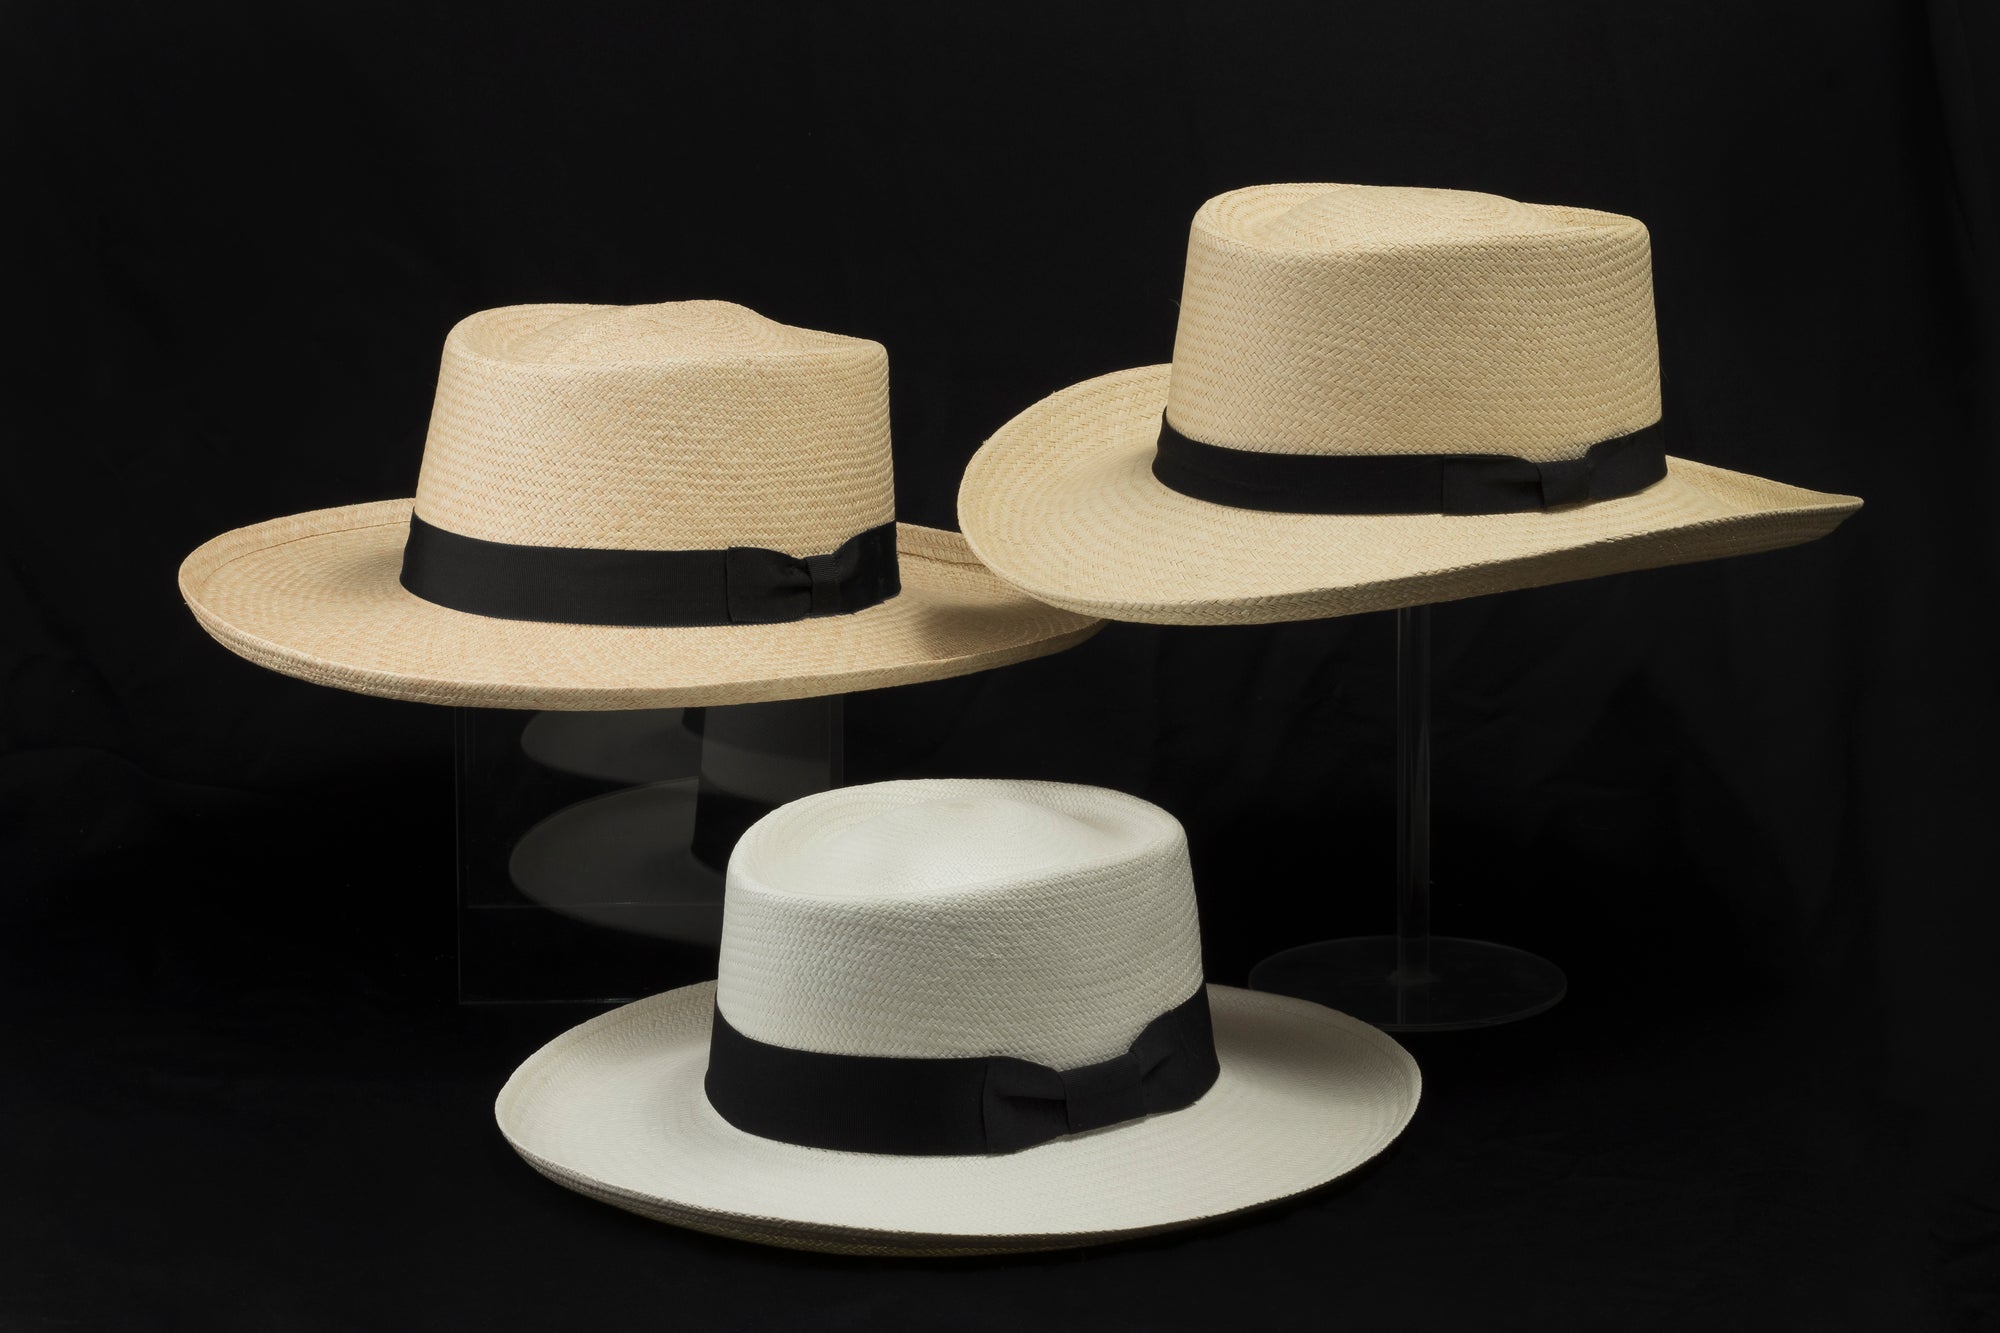 How much do Panama hats cost?